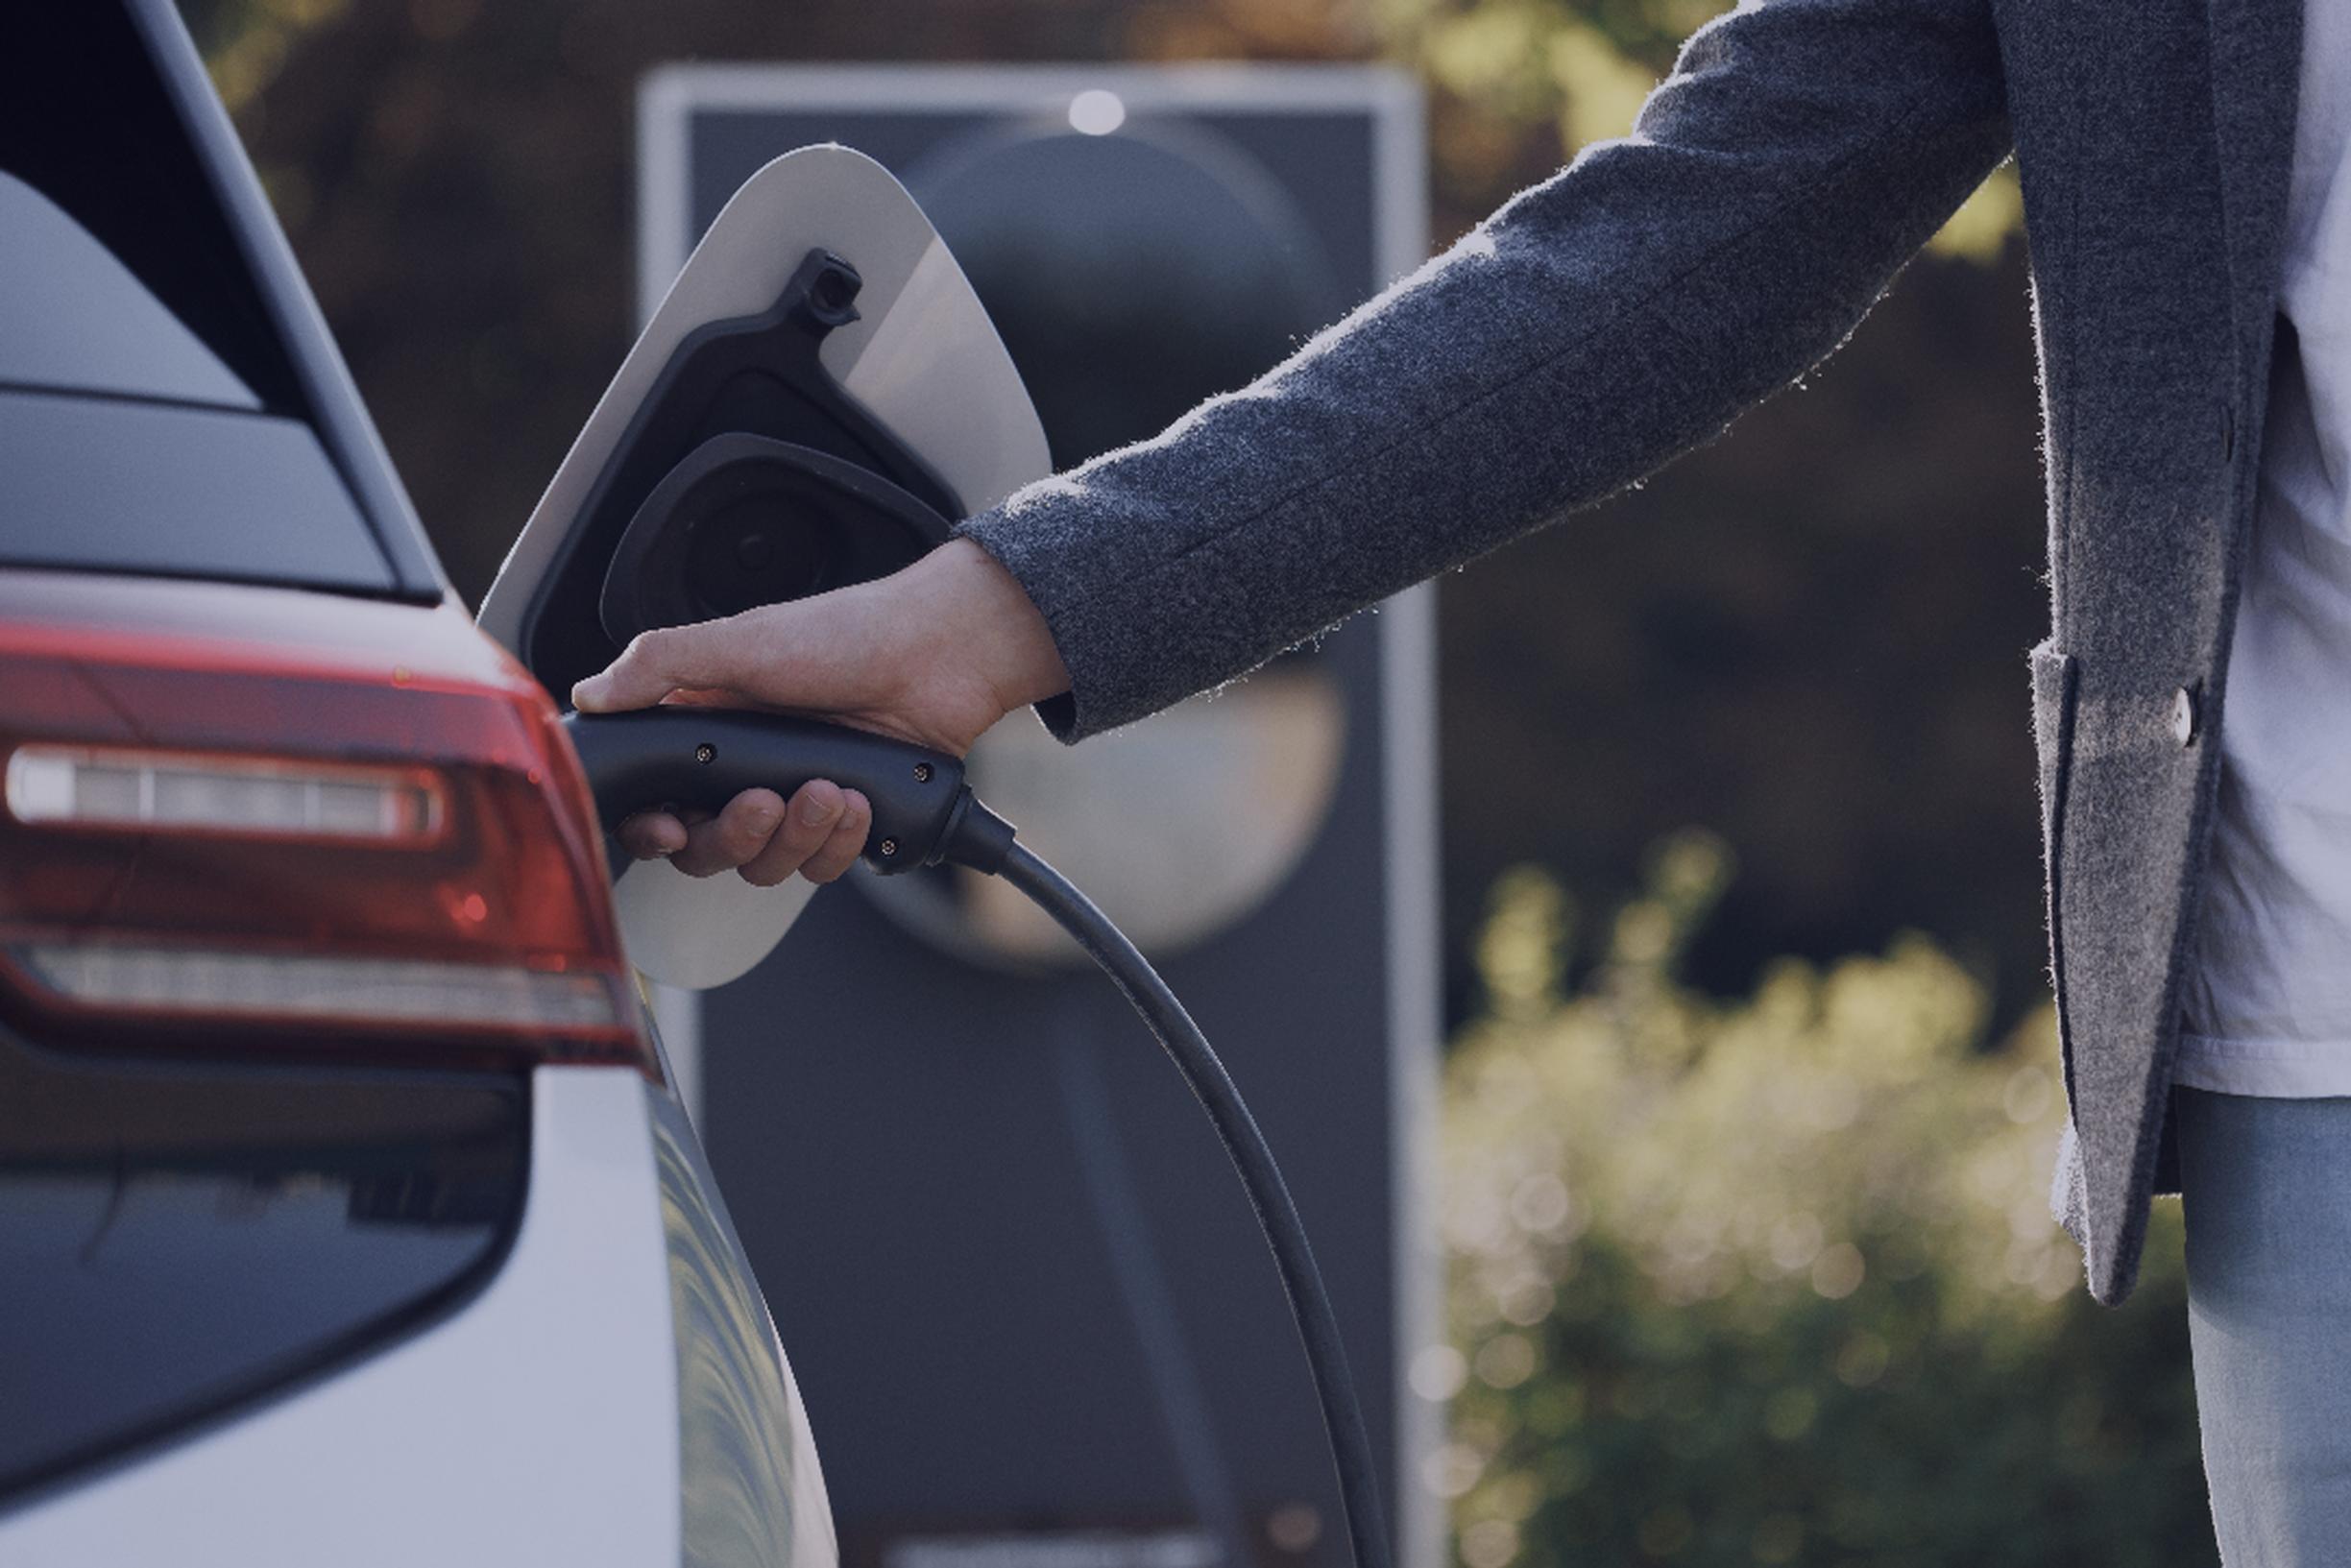 Connected car services provider Parkopedia is partnering with ChargeHub